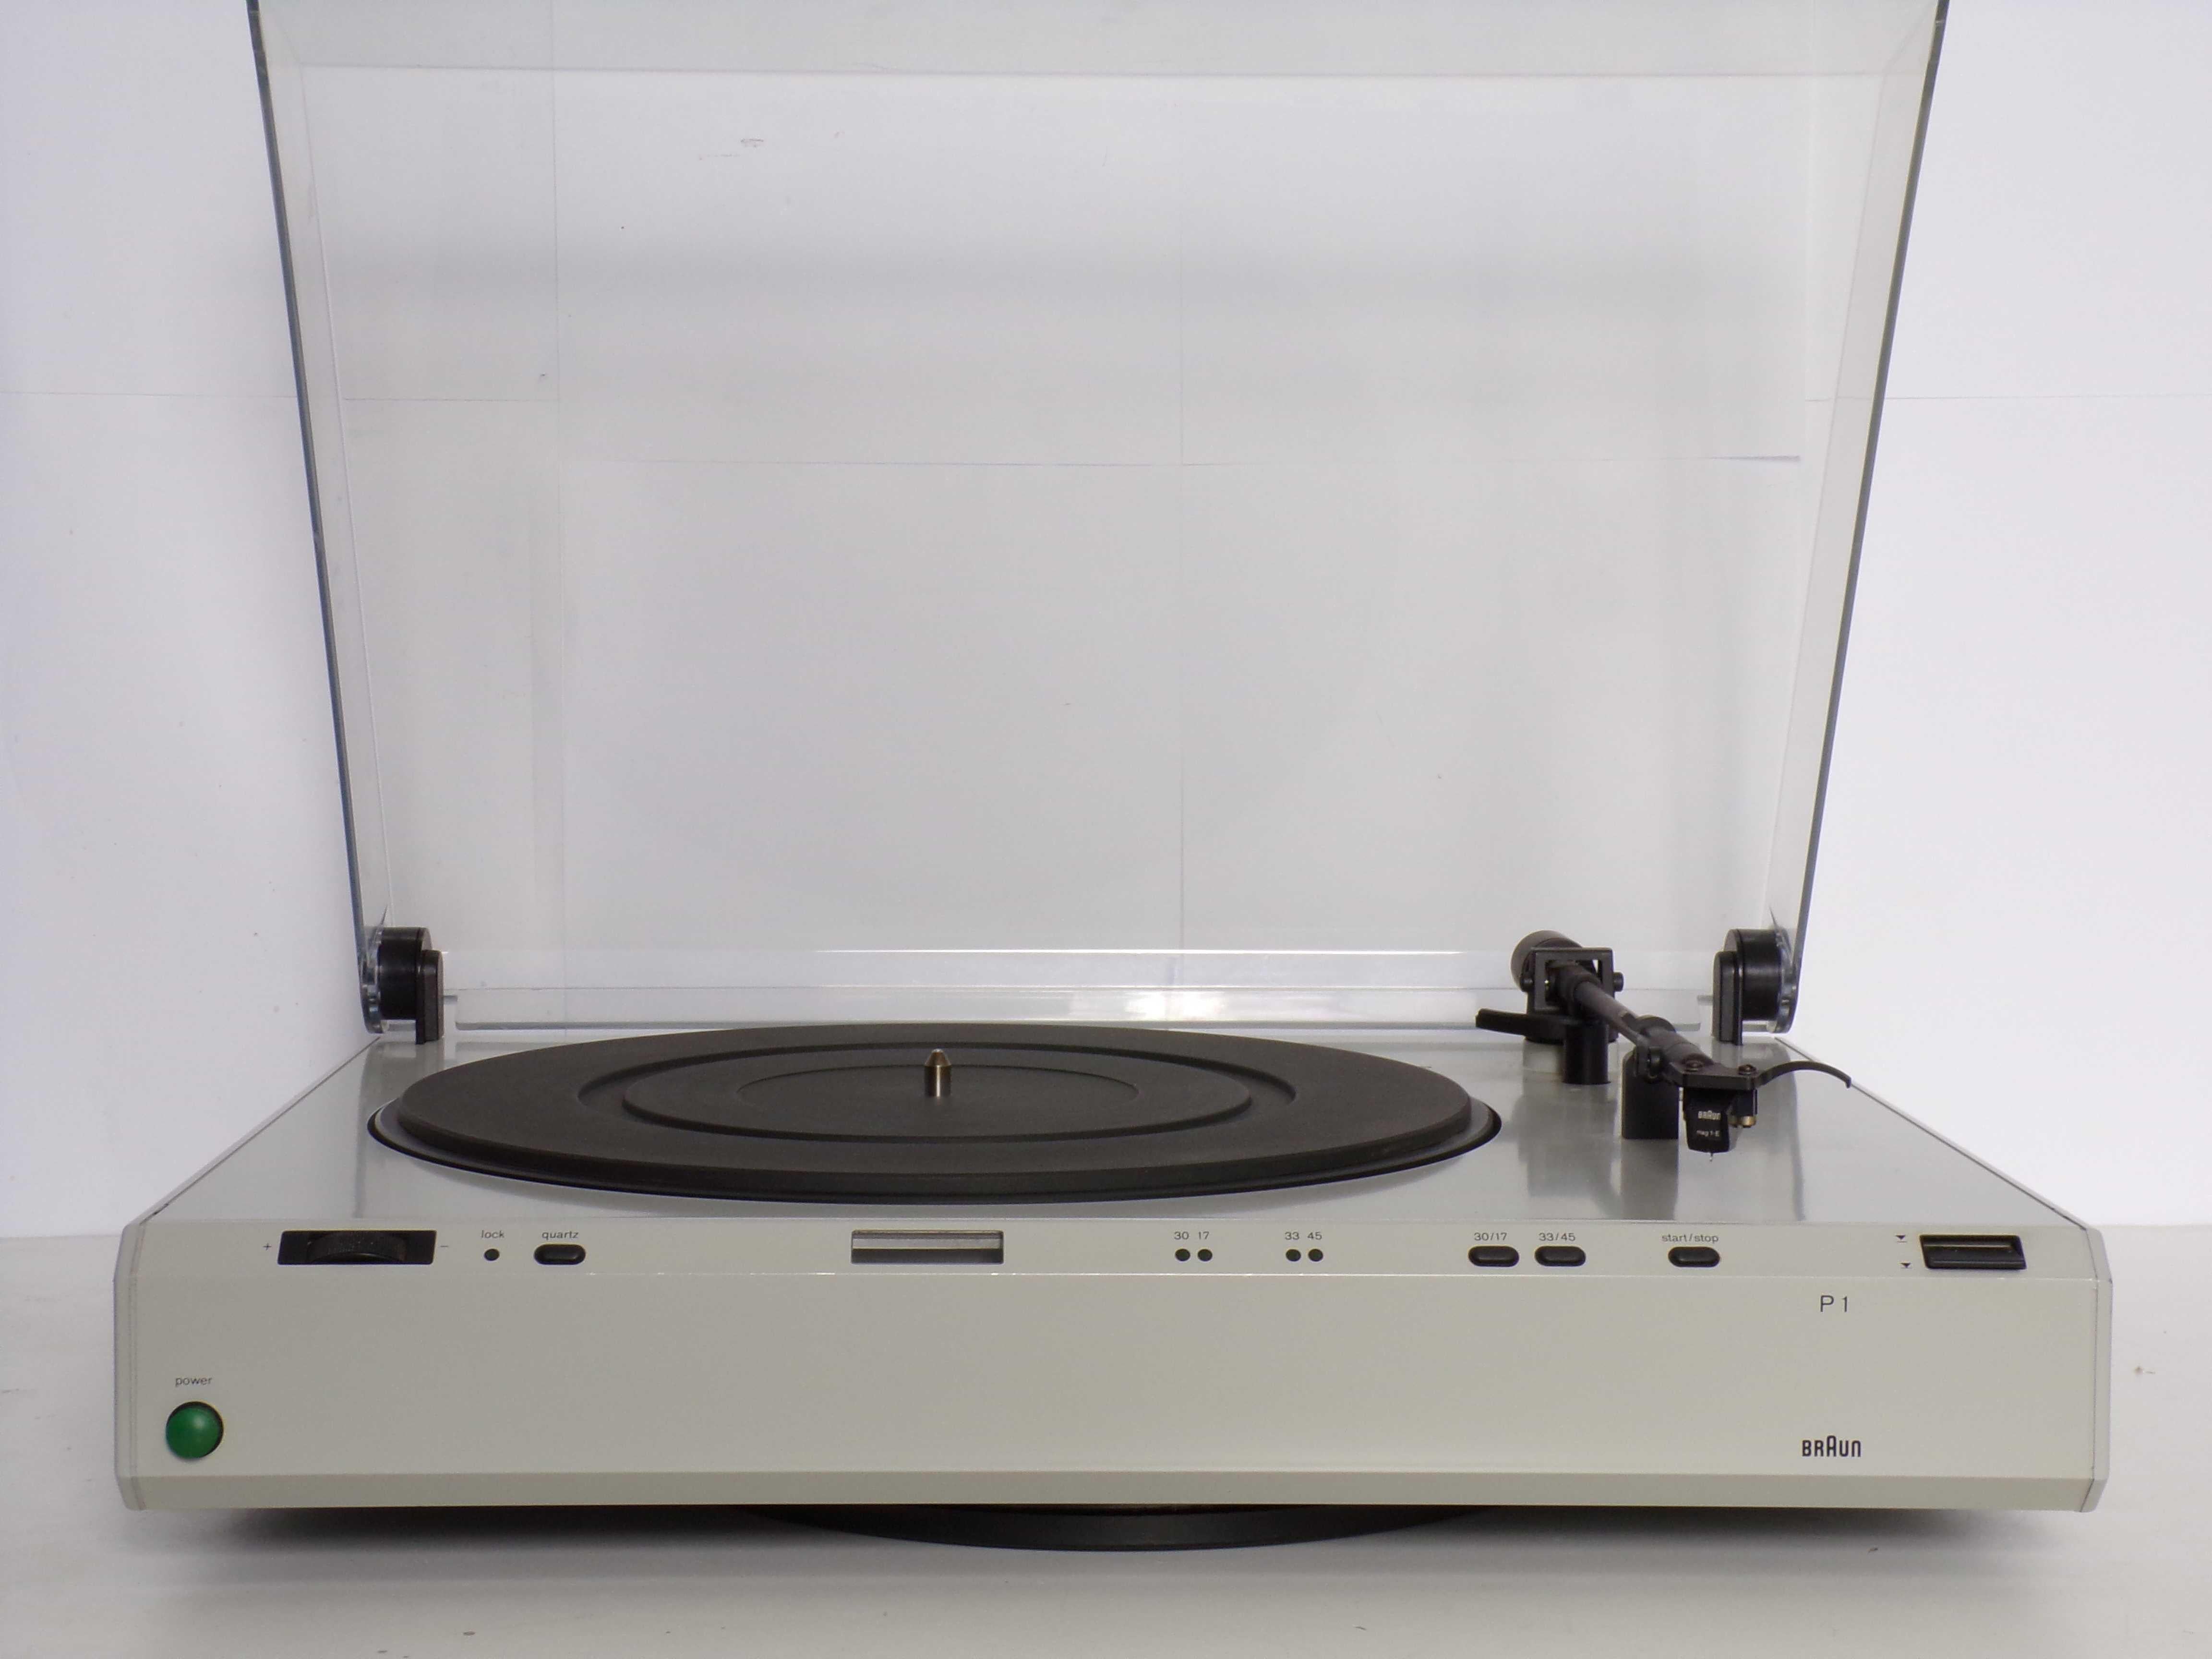 White record player Braun Atelier HiFi P1, designed by Dieter Rams for Braun, 1980. Very good state, runs without problems, sound is very good. Furthermore, the device was fully checked. Just light signs of usage. The cover has some scratches.